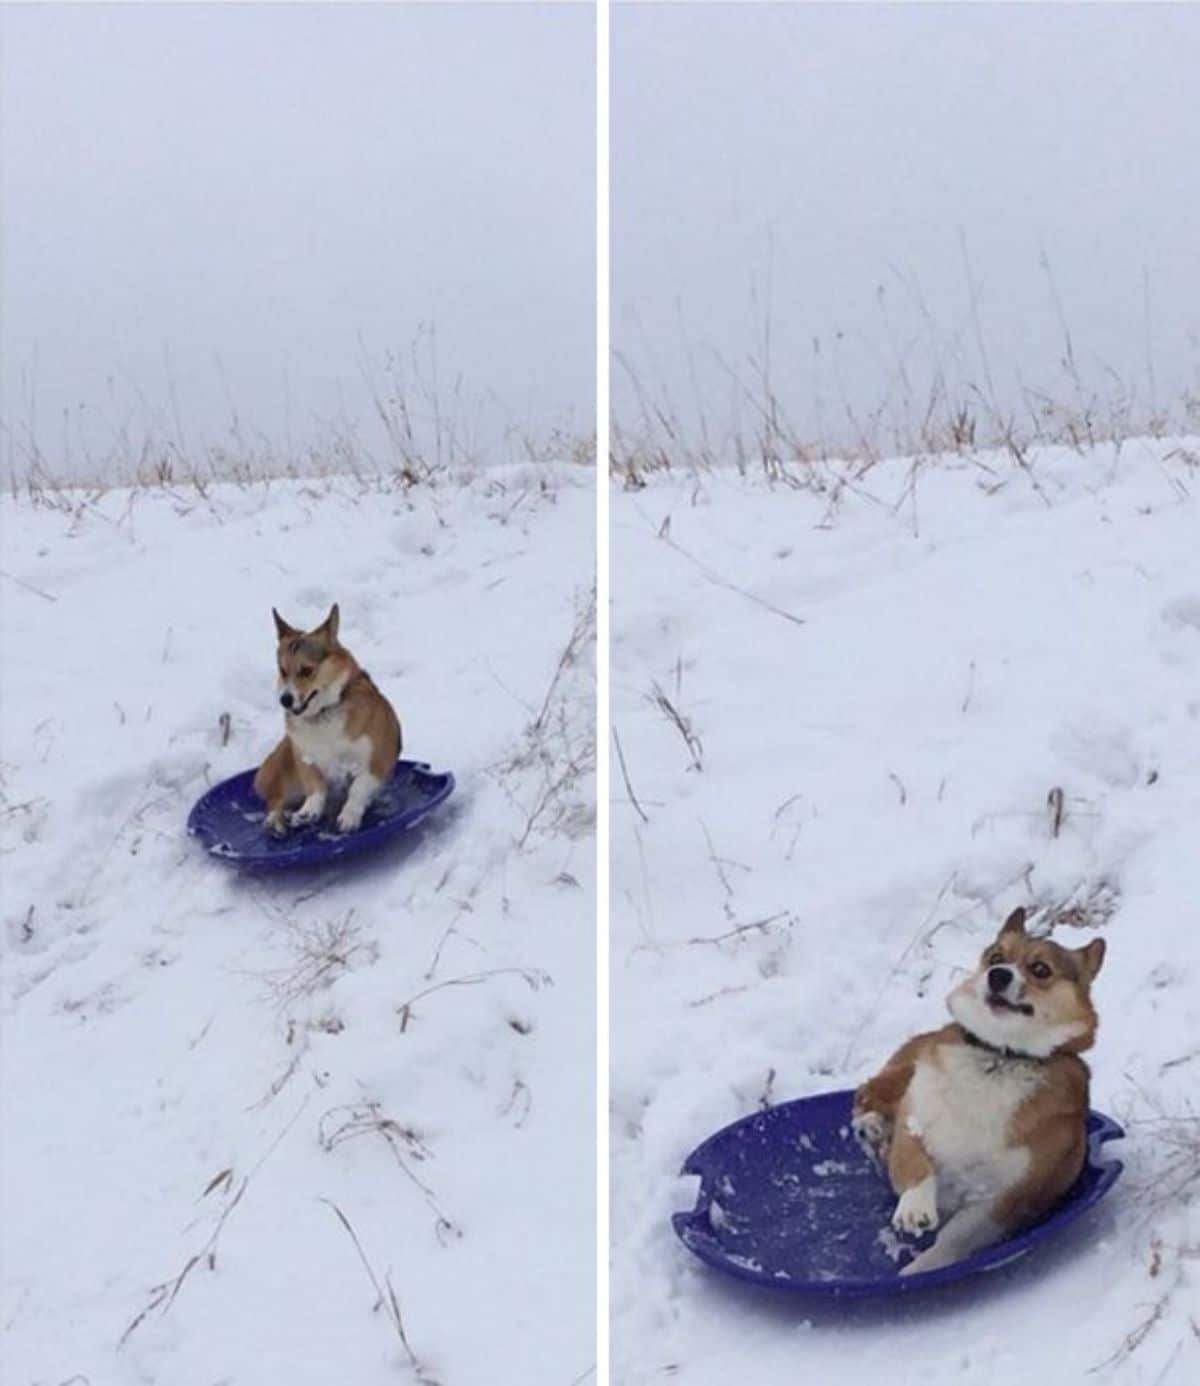 2 photos of a brown and white corgi sliding down a snowy hill on a circular purple slide and looking alarmed